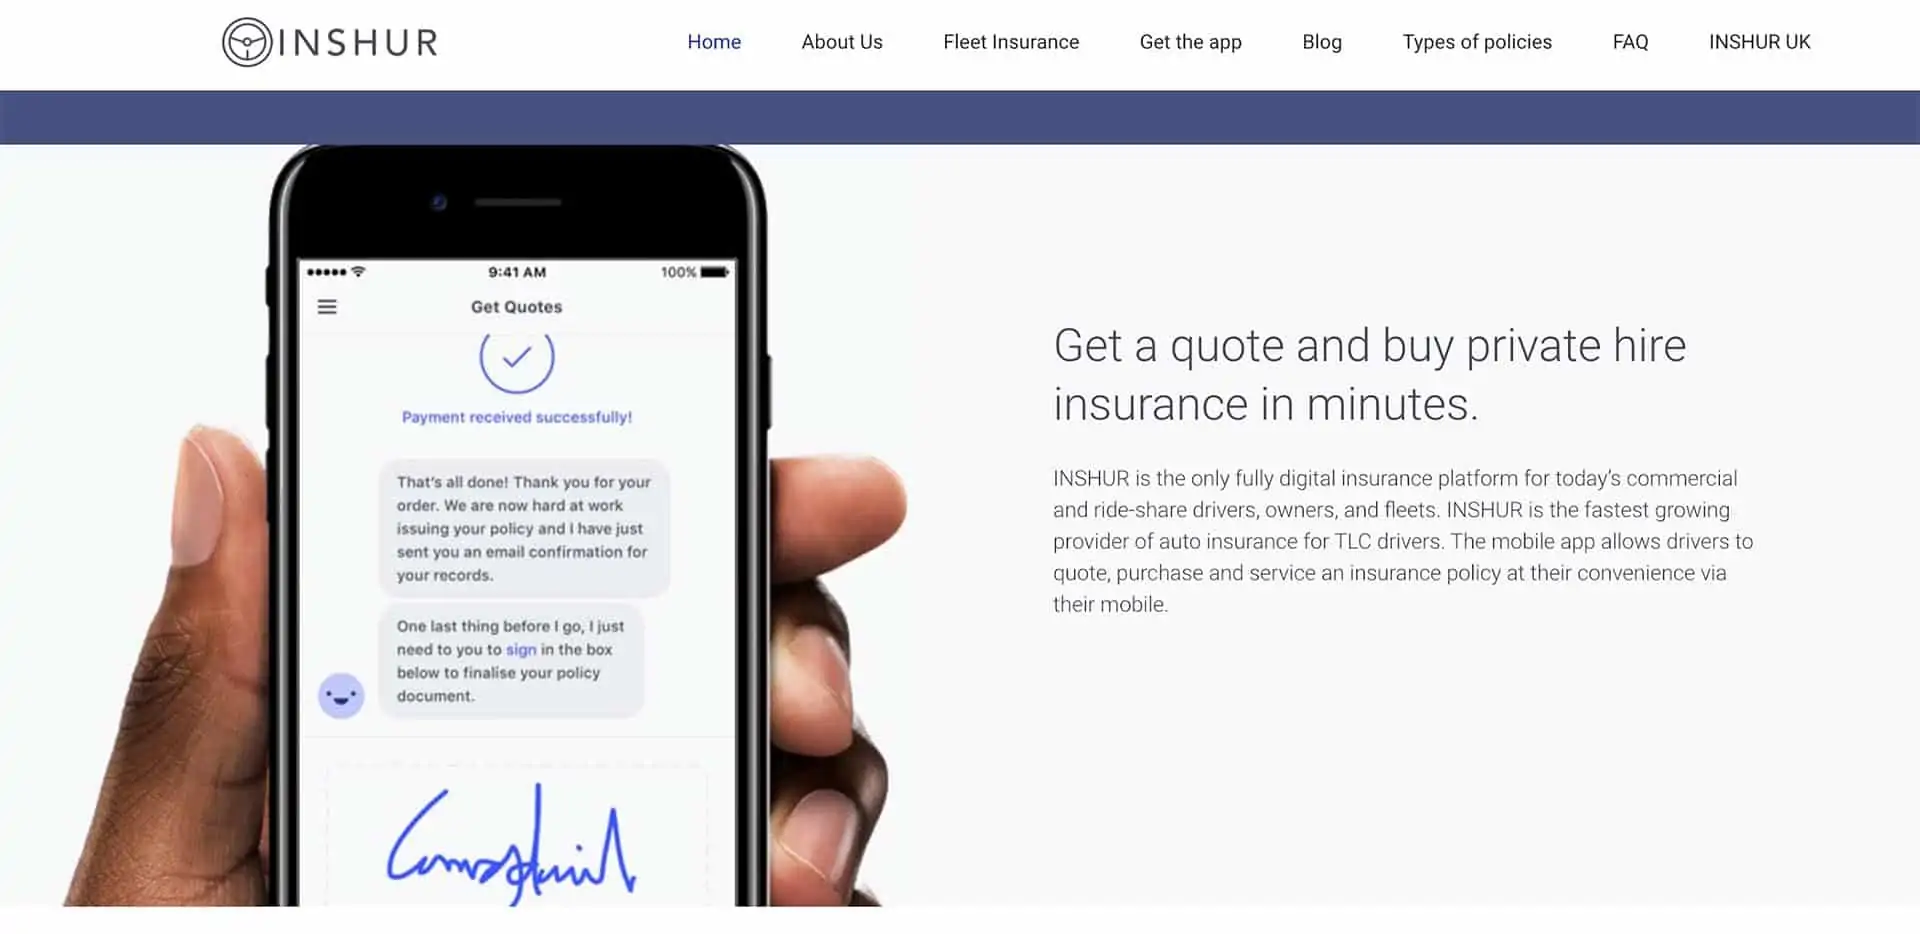 A&Y Royal's New App Makes Getting Insurance Quick and Easy - Black Car News